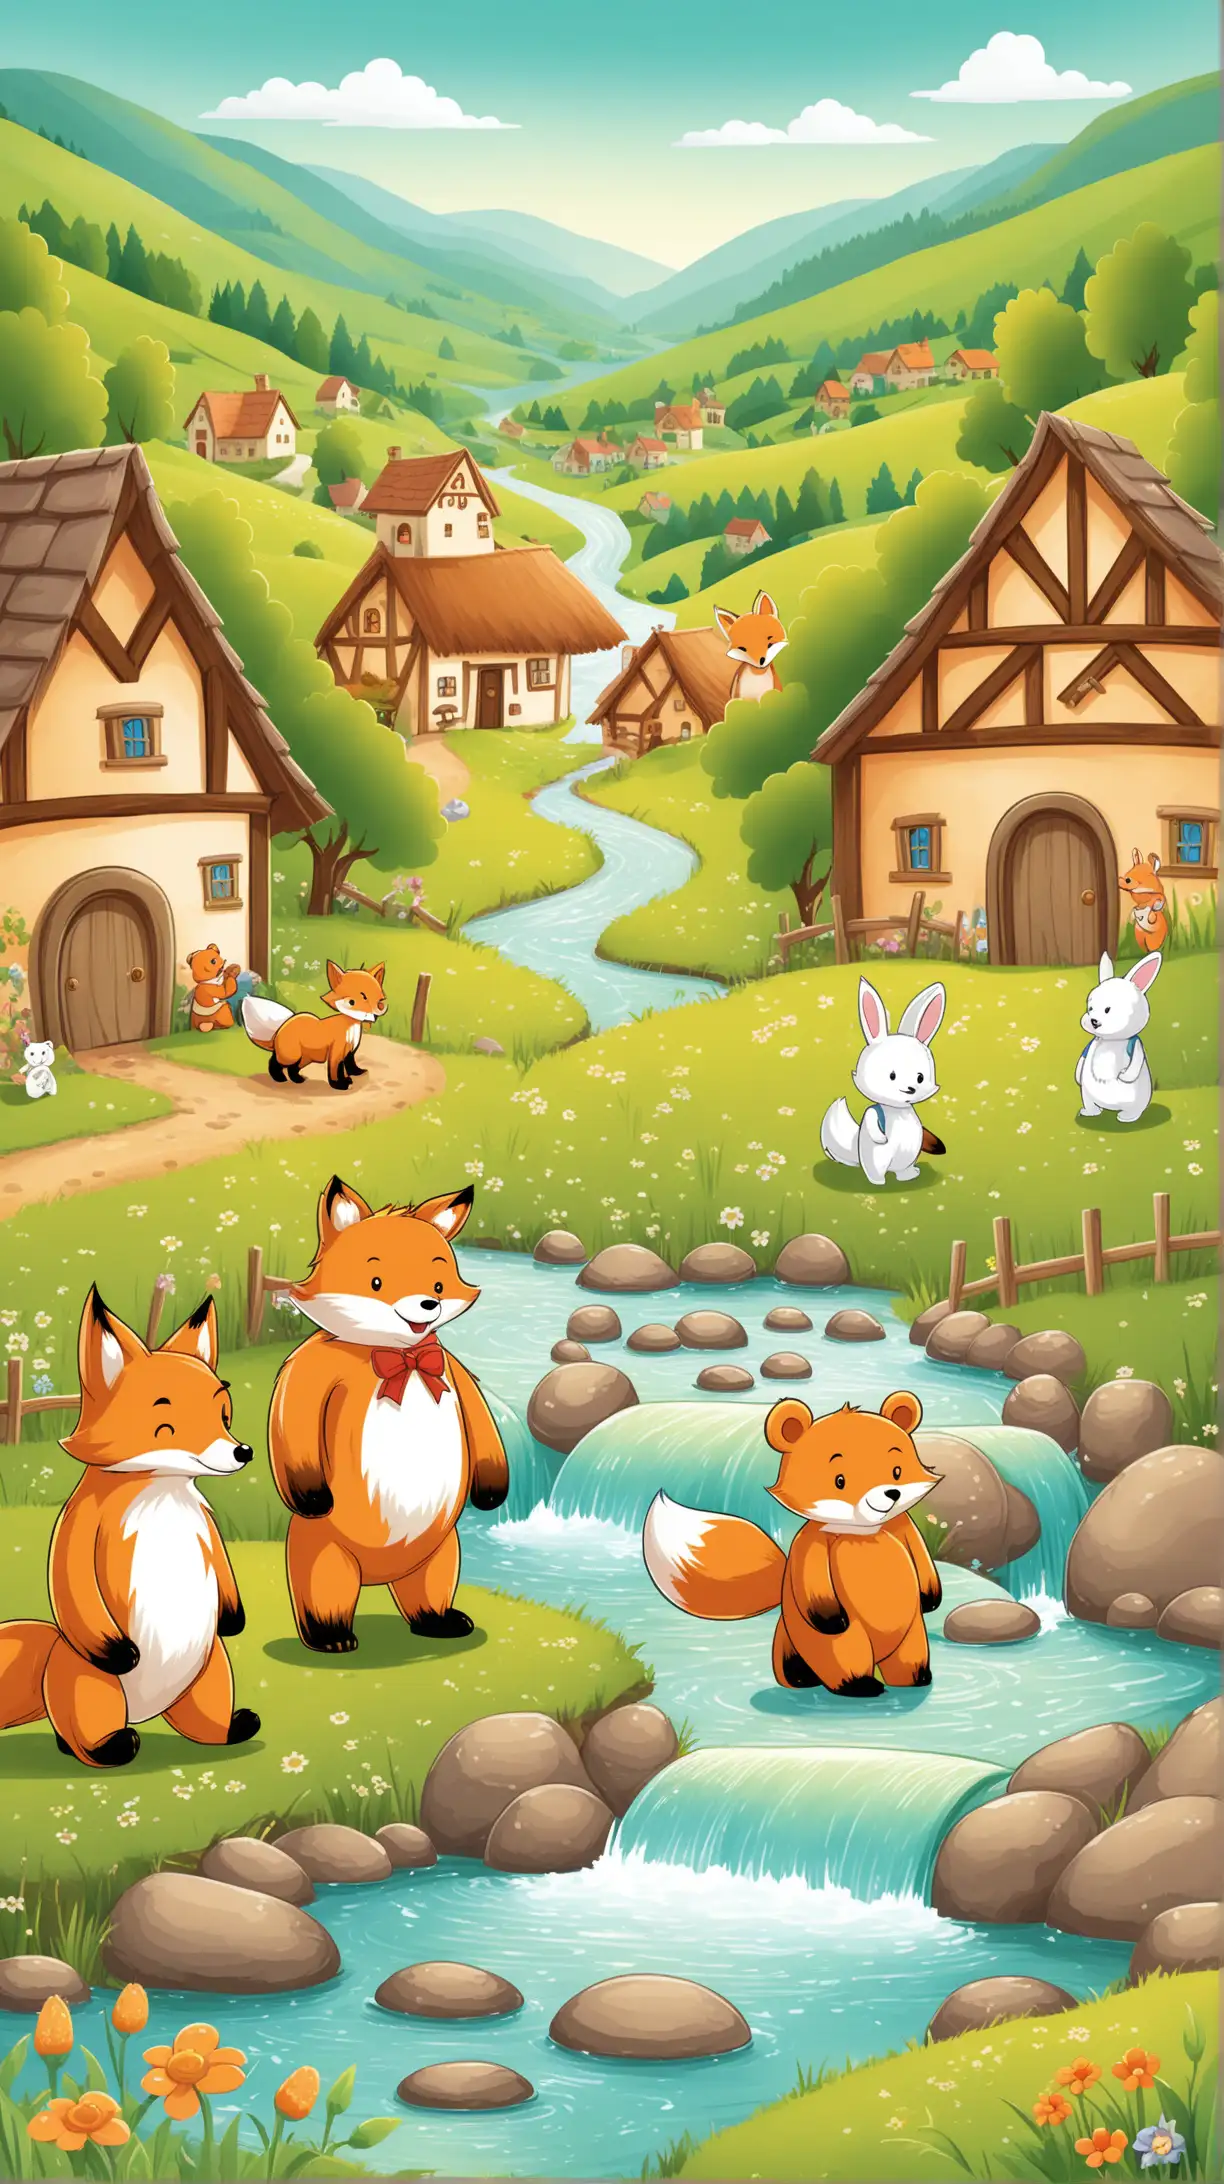 Create a cartoon vector illustration  of a fox standing next to a rabbit and  bear cub. The background is a cozy village nestled between green hills and a babbling brook for a children's picture book.